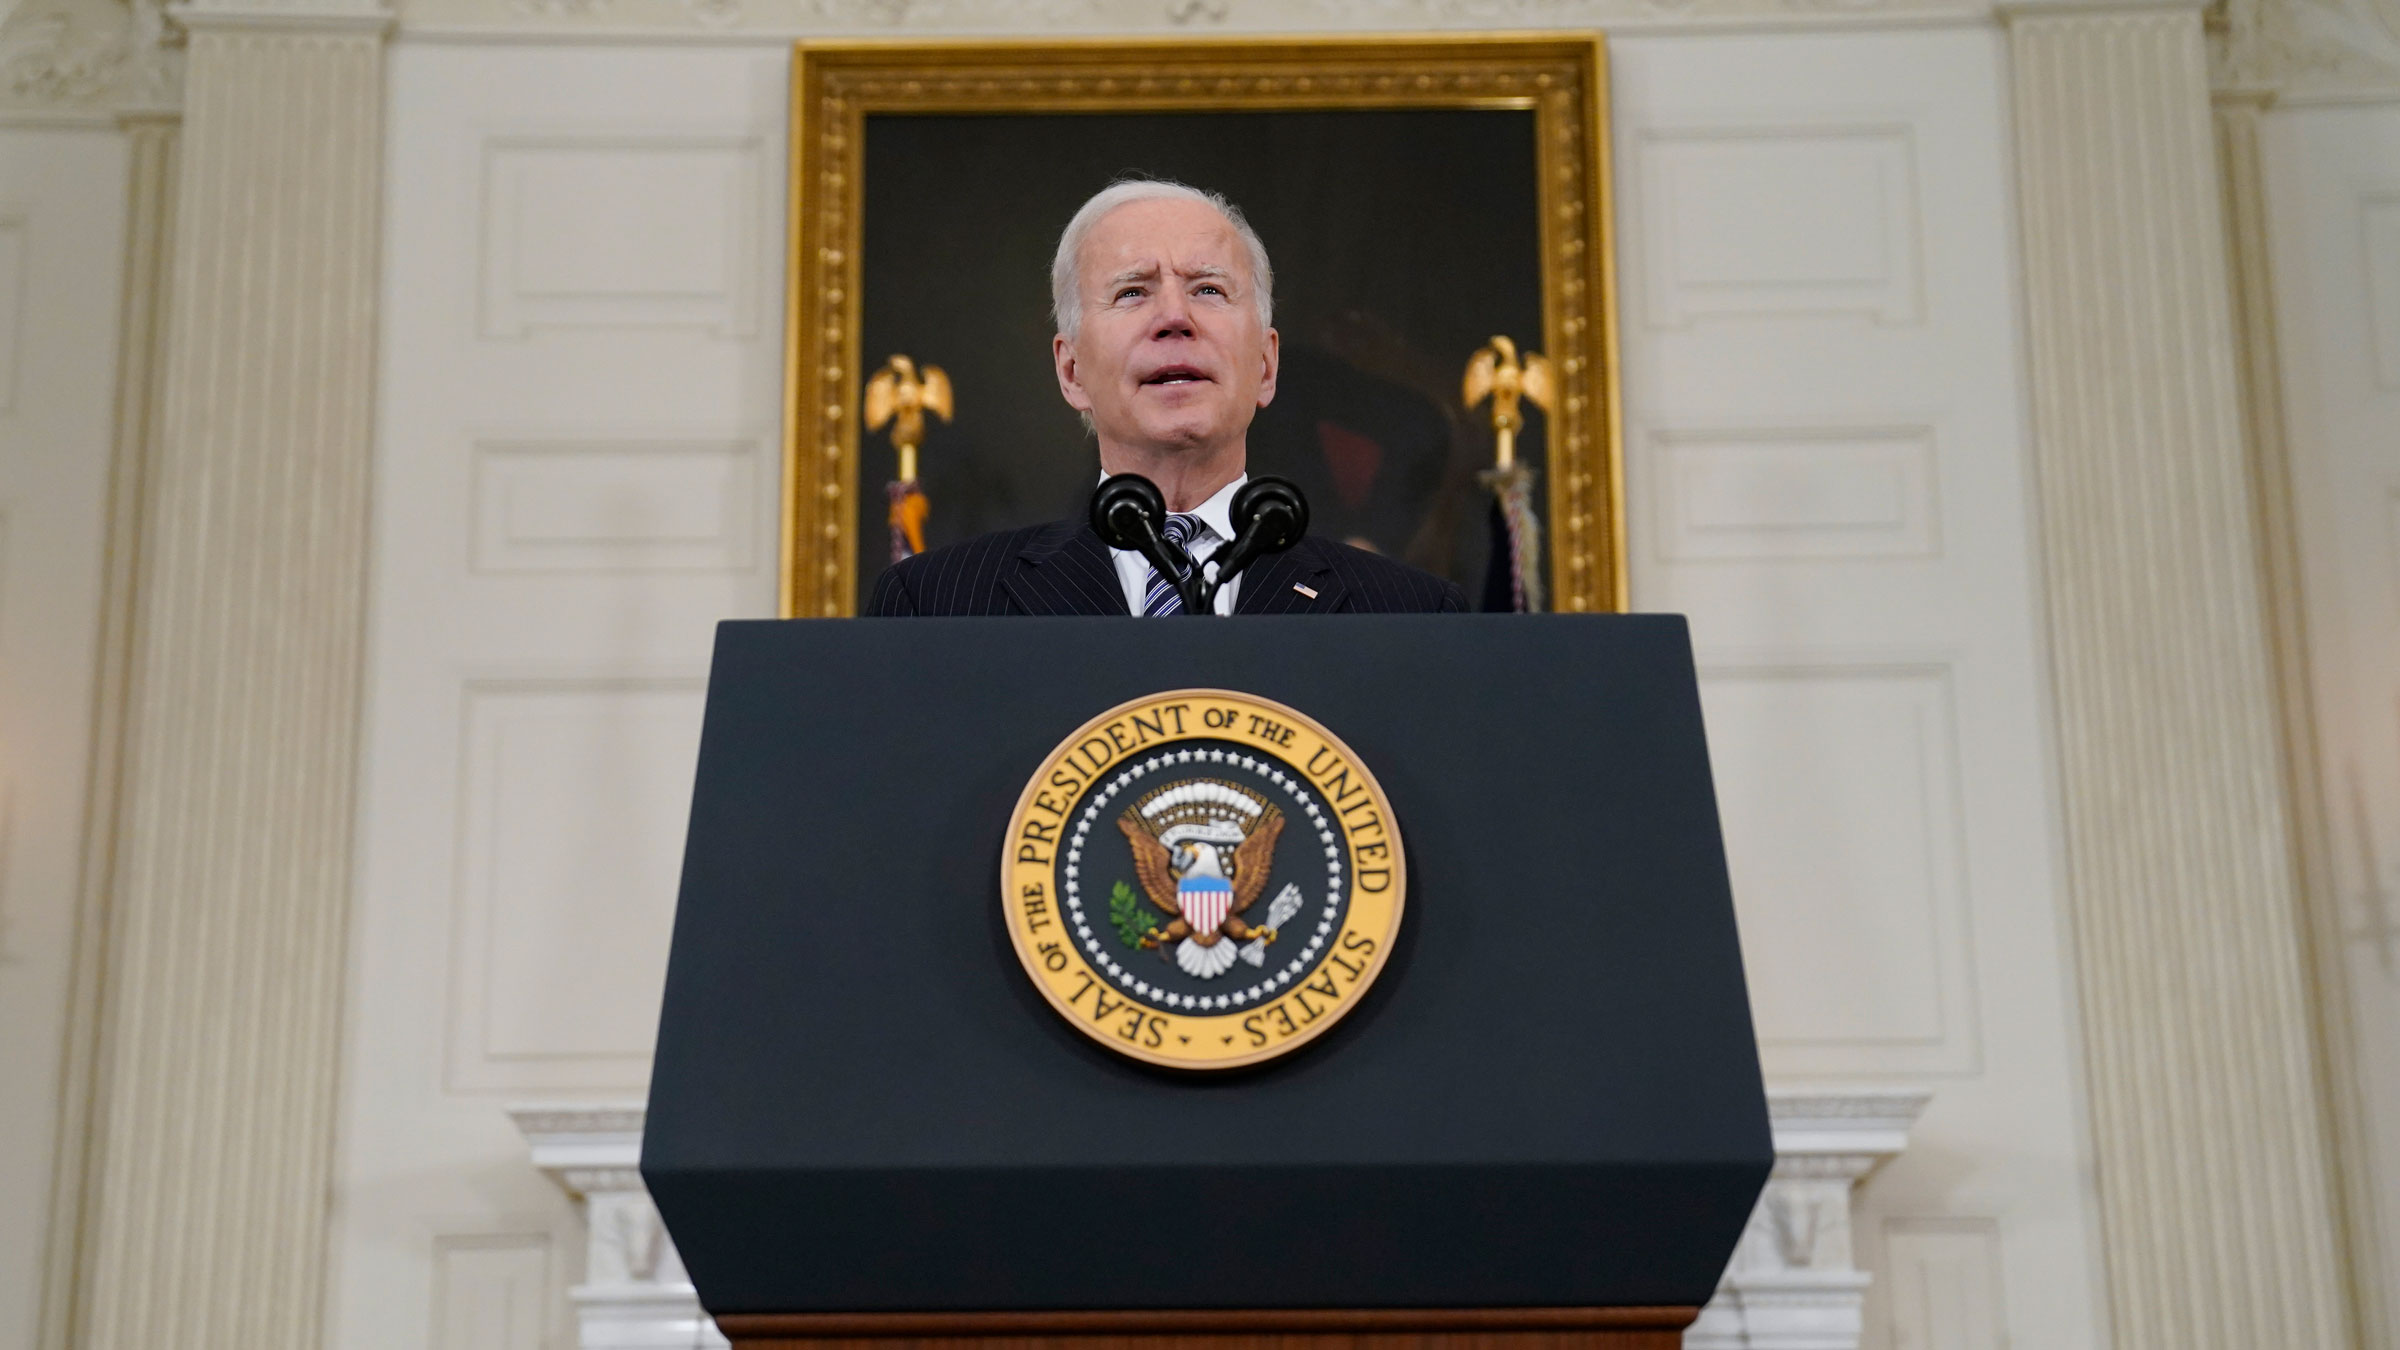 biden-moves-up-deadline-for-all-us-adults-to-be-eligible-for-covid-19-vaccine-april-19-instead-of-may-1